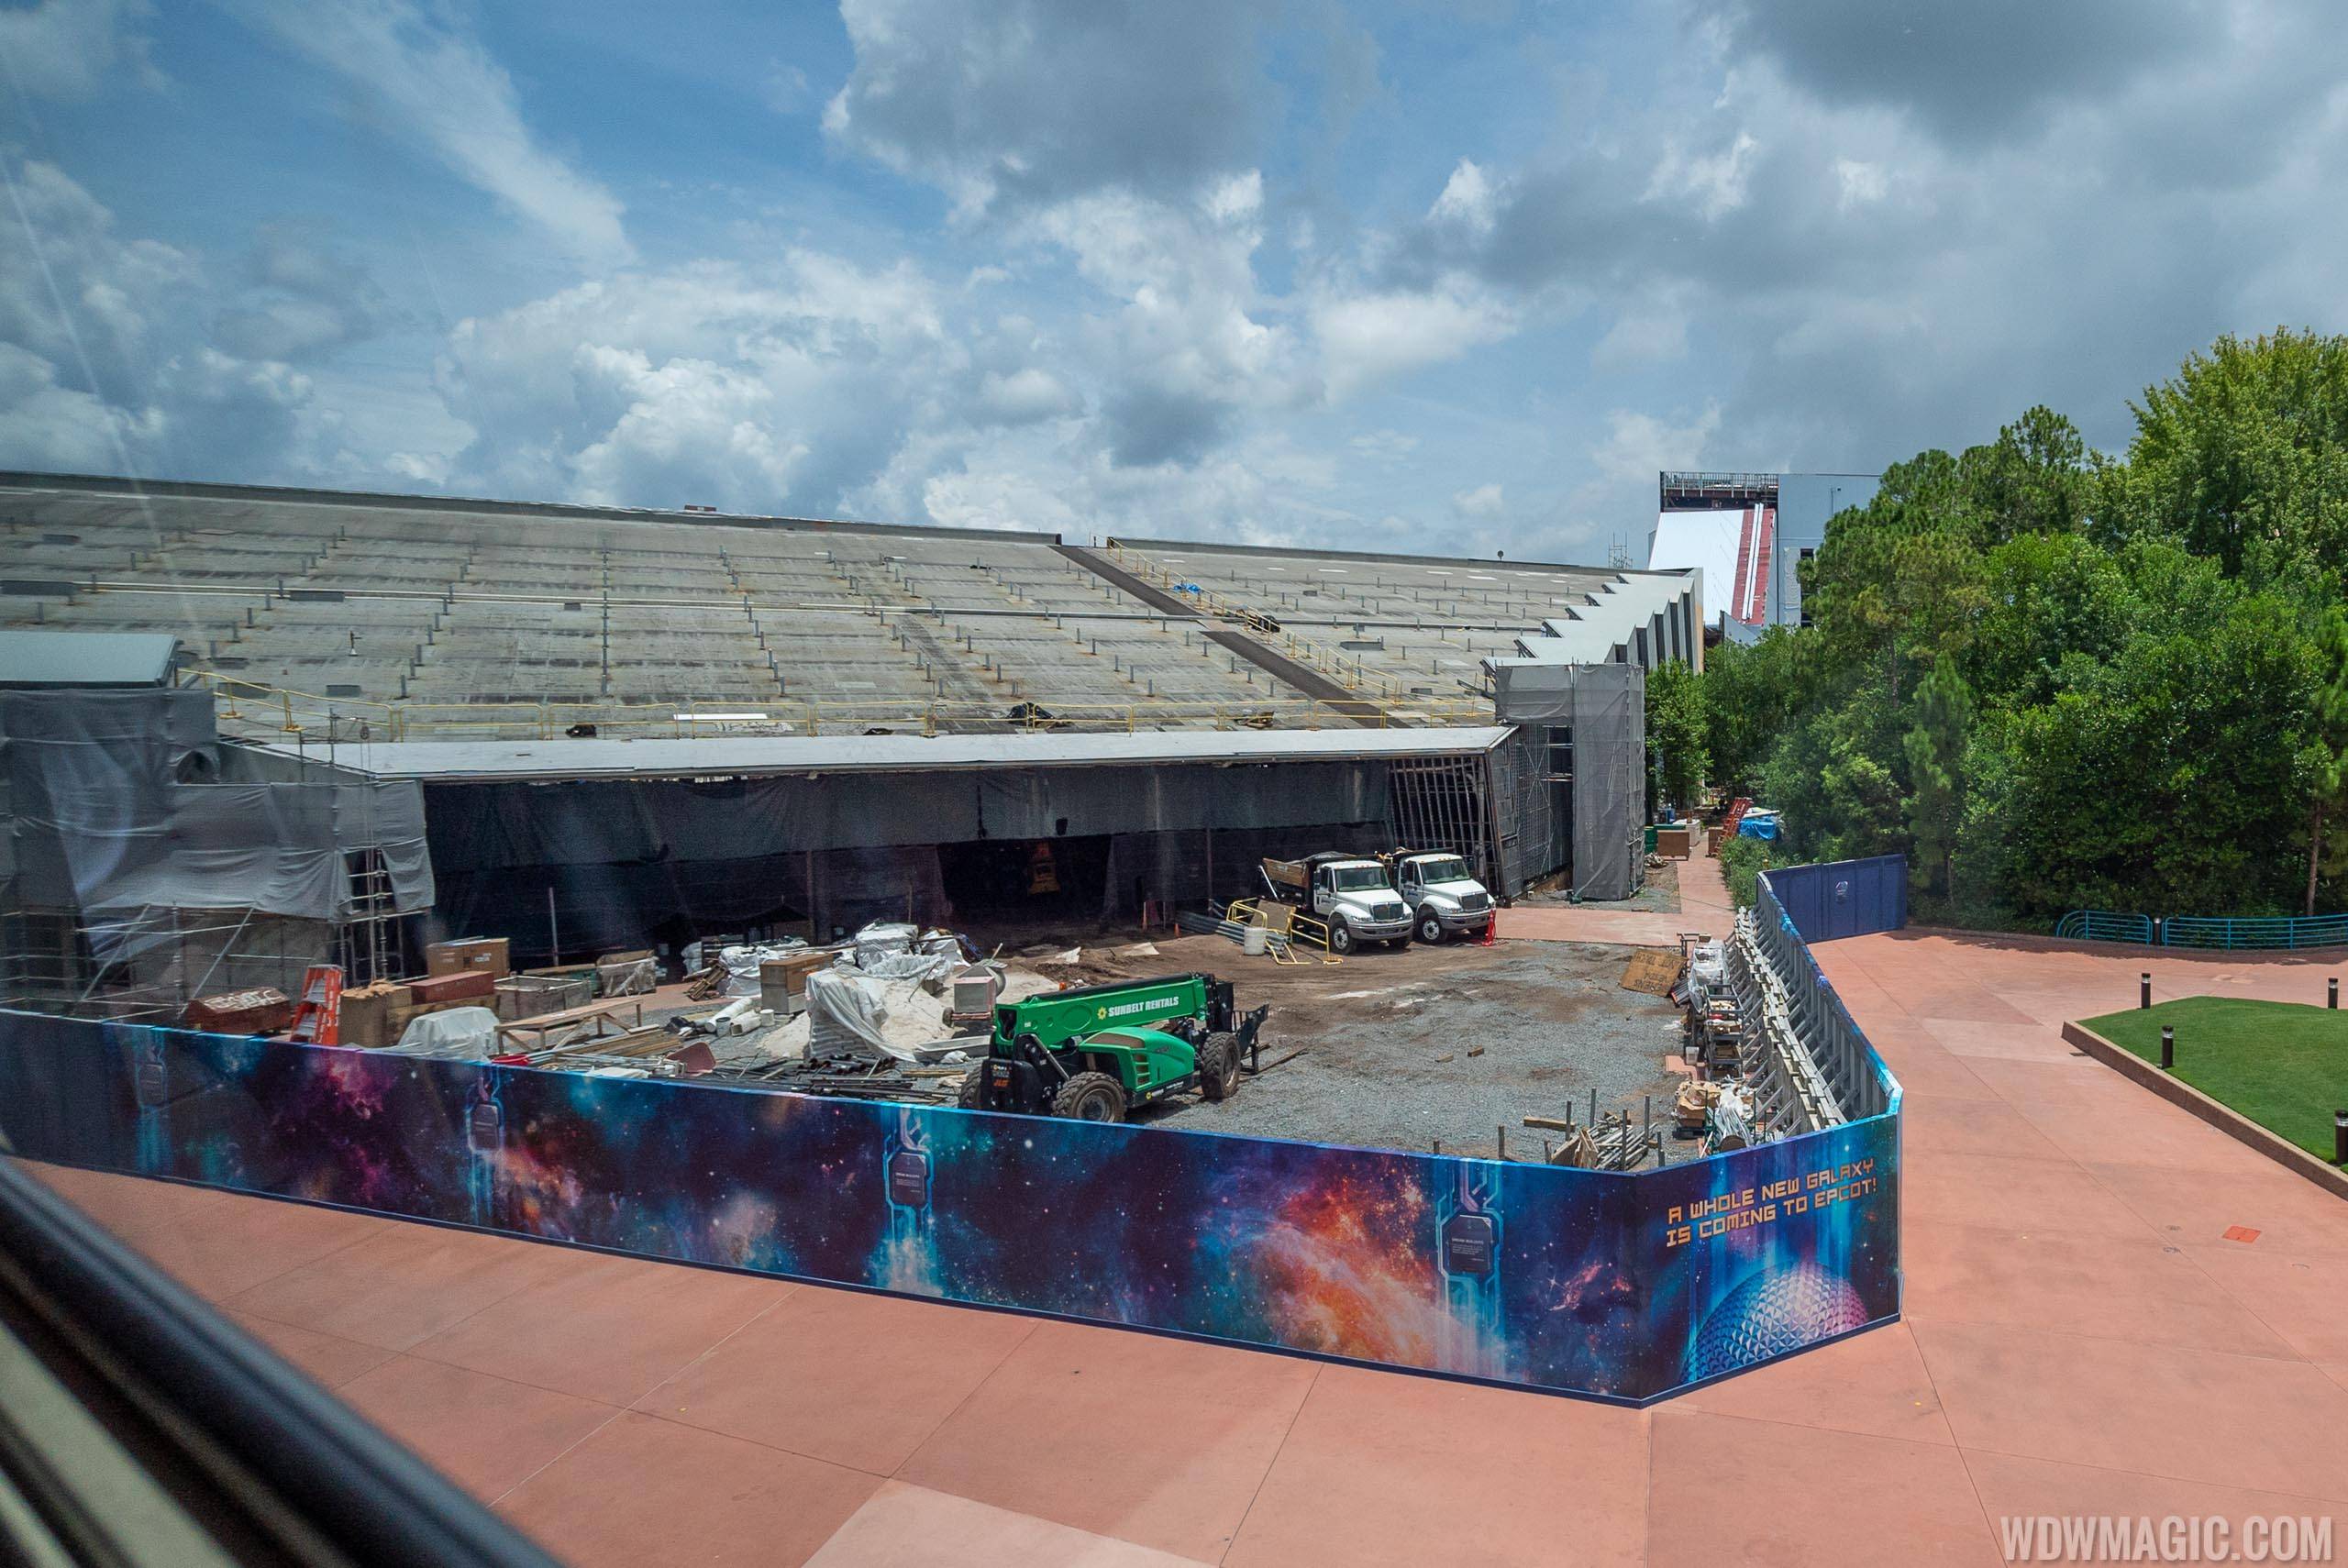 Guardians of the Galaxy construction from inside park - July 2019